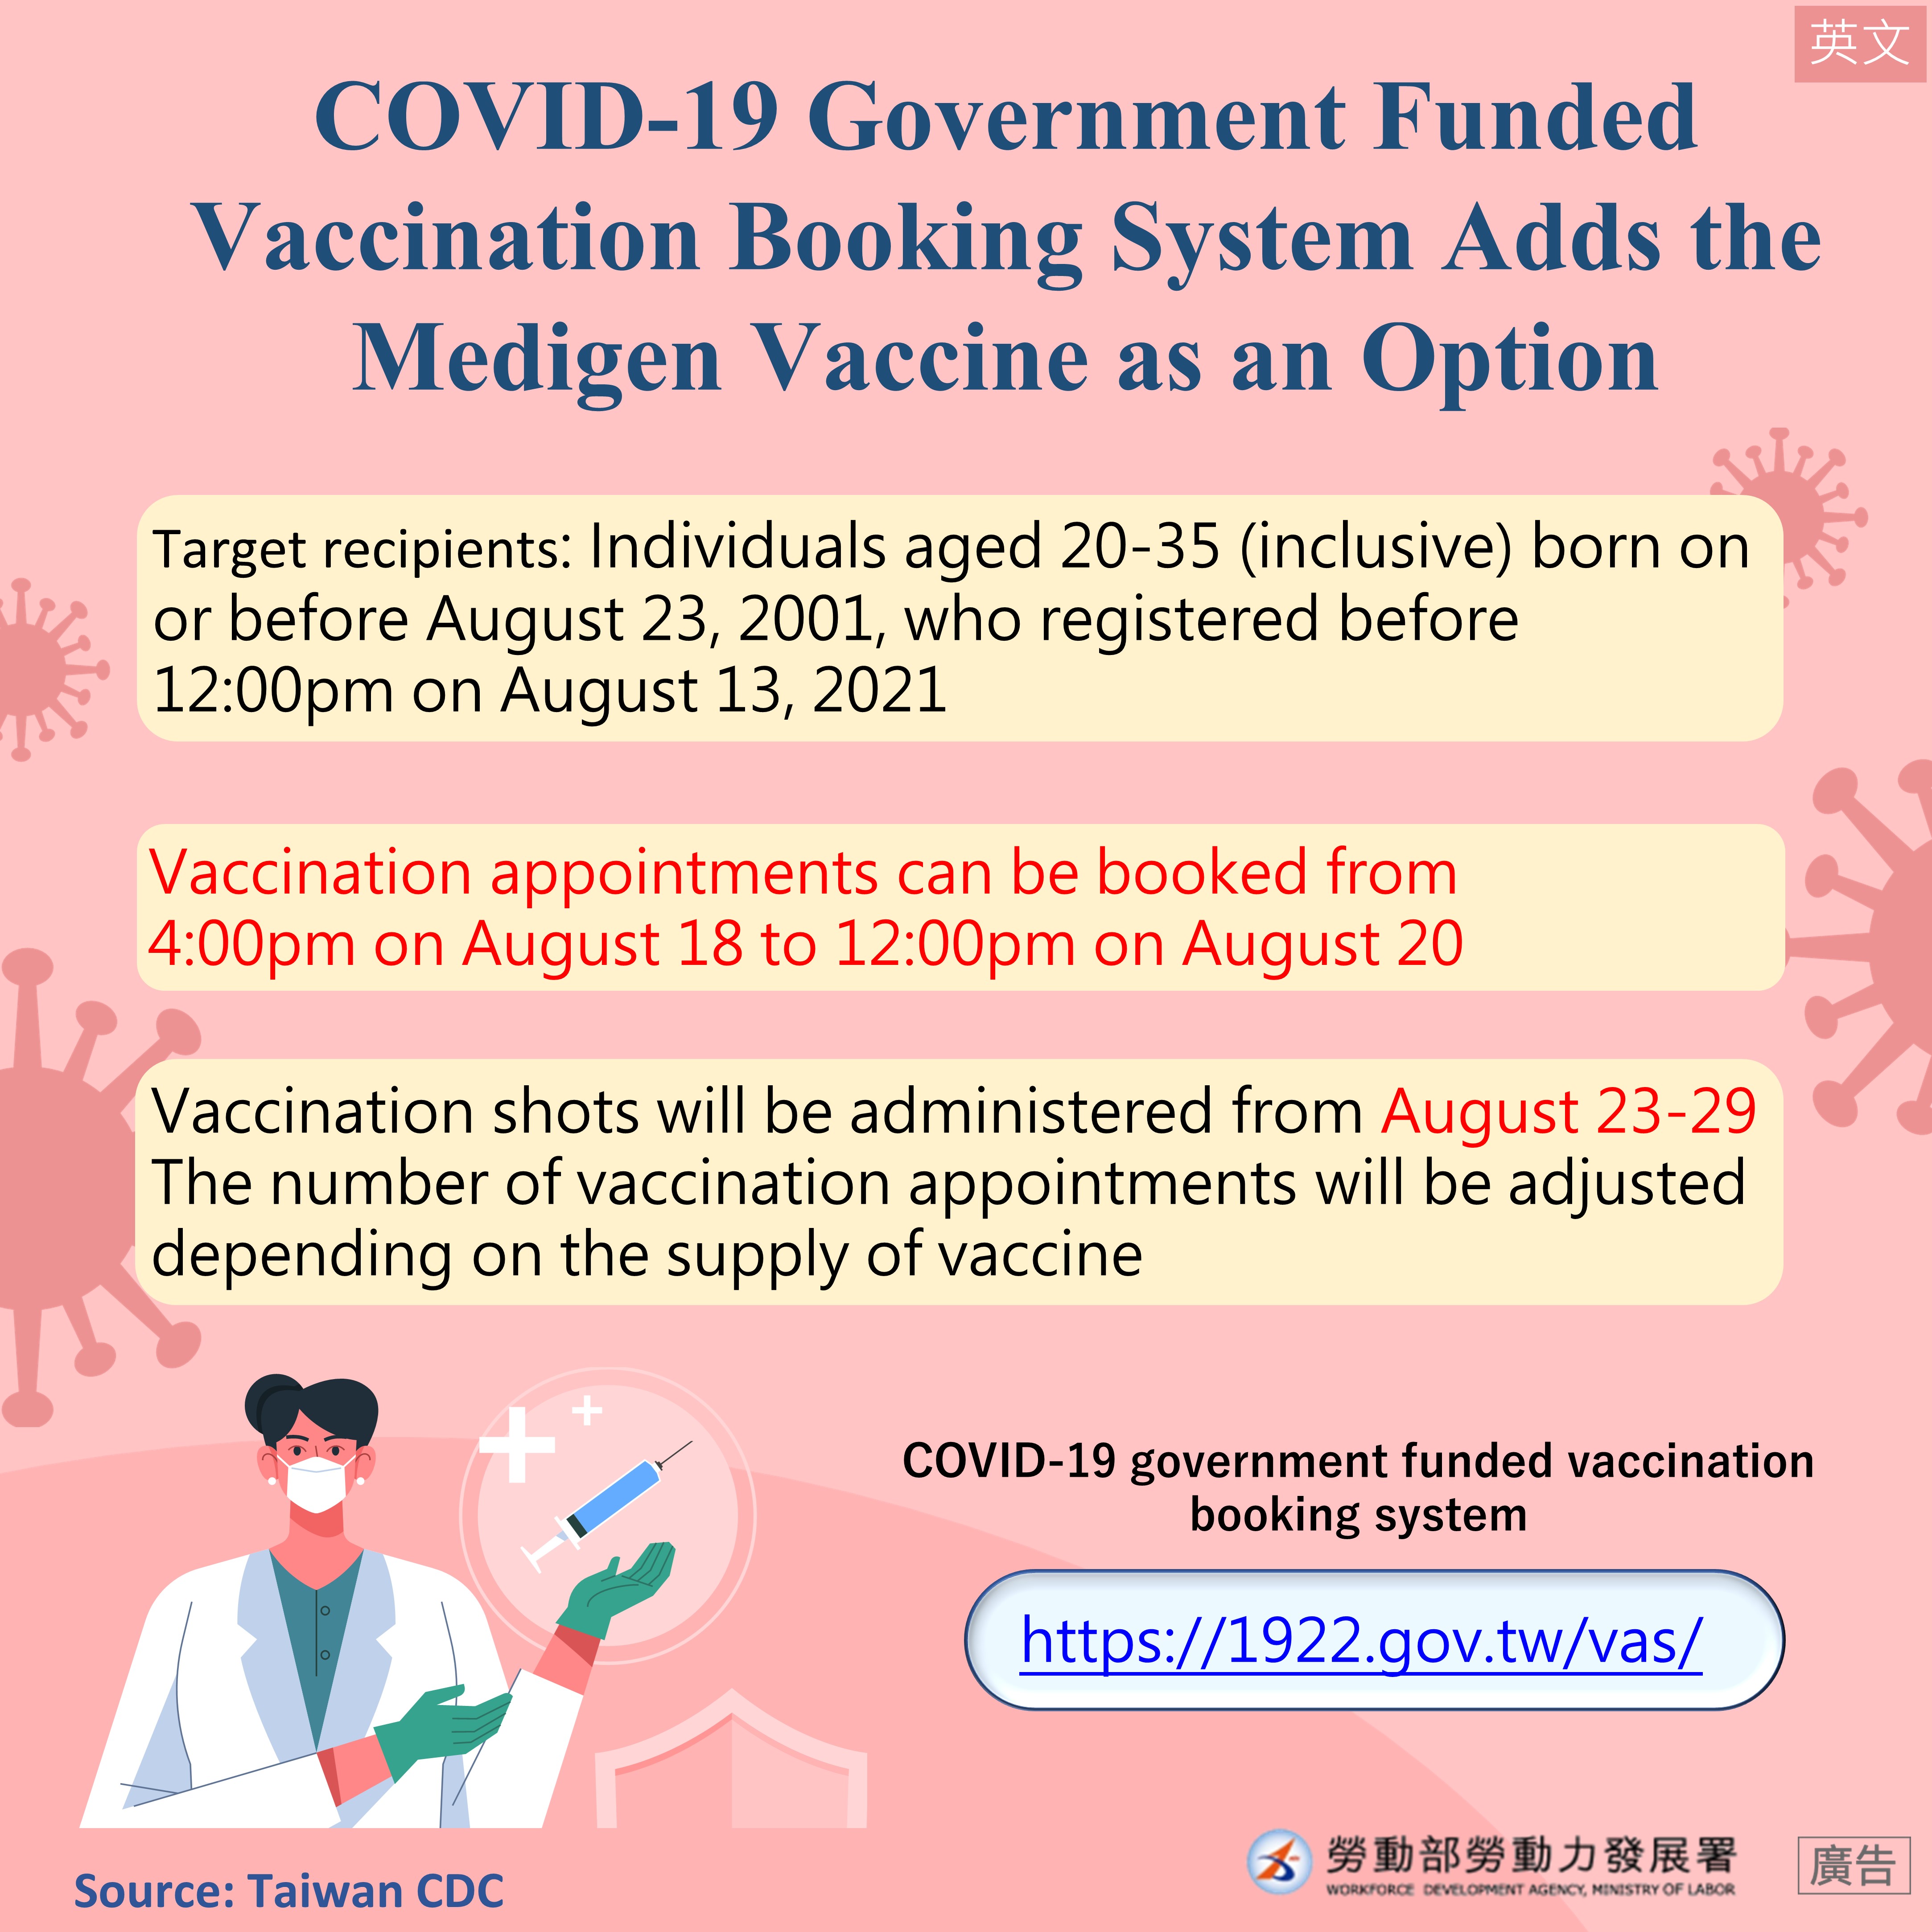 The vaccine reservation platform adds the qualifications for receiving the Medigen vaccine in the reservation platform. Photo/Provided by Taichung Labor Affairs Bureau